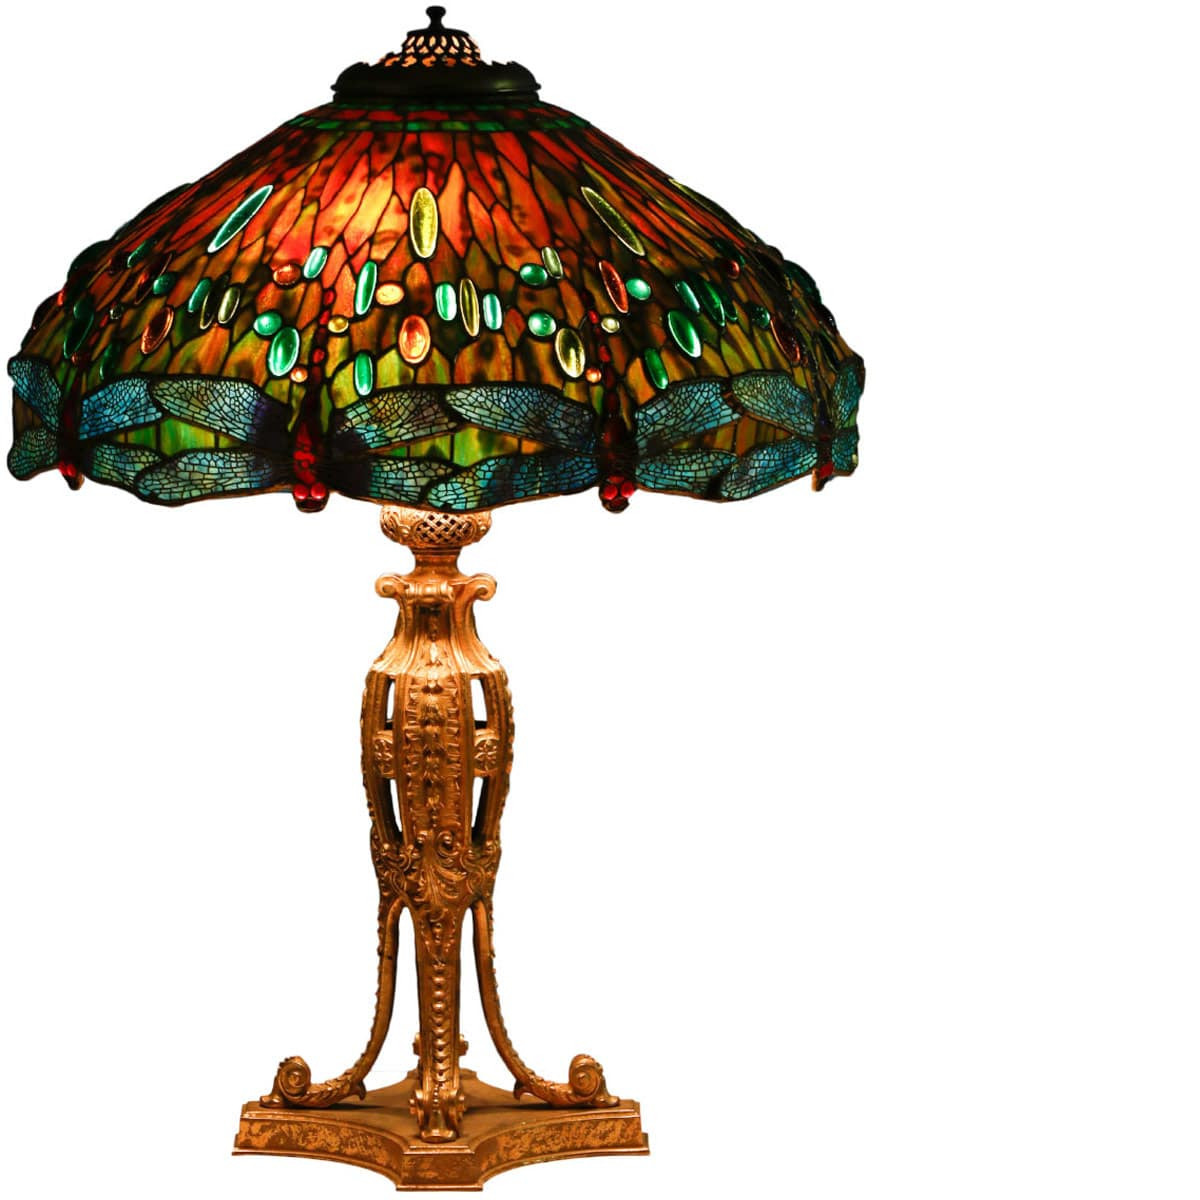 22 Spectacular Daum Nancy Vase Prices 2024 free download daum nancy vase prices of glass crystal for hanging head dragonfly table lamp after tiffany ahlers ogletree auction gallery